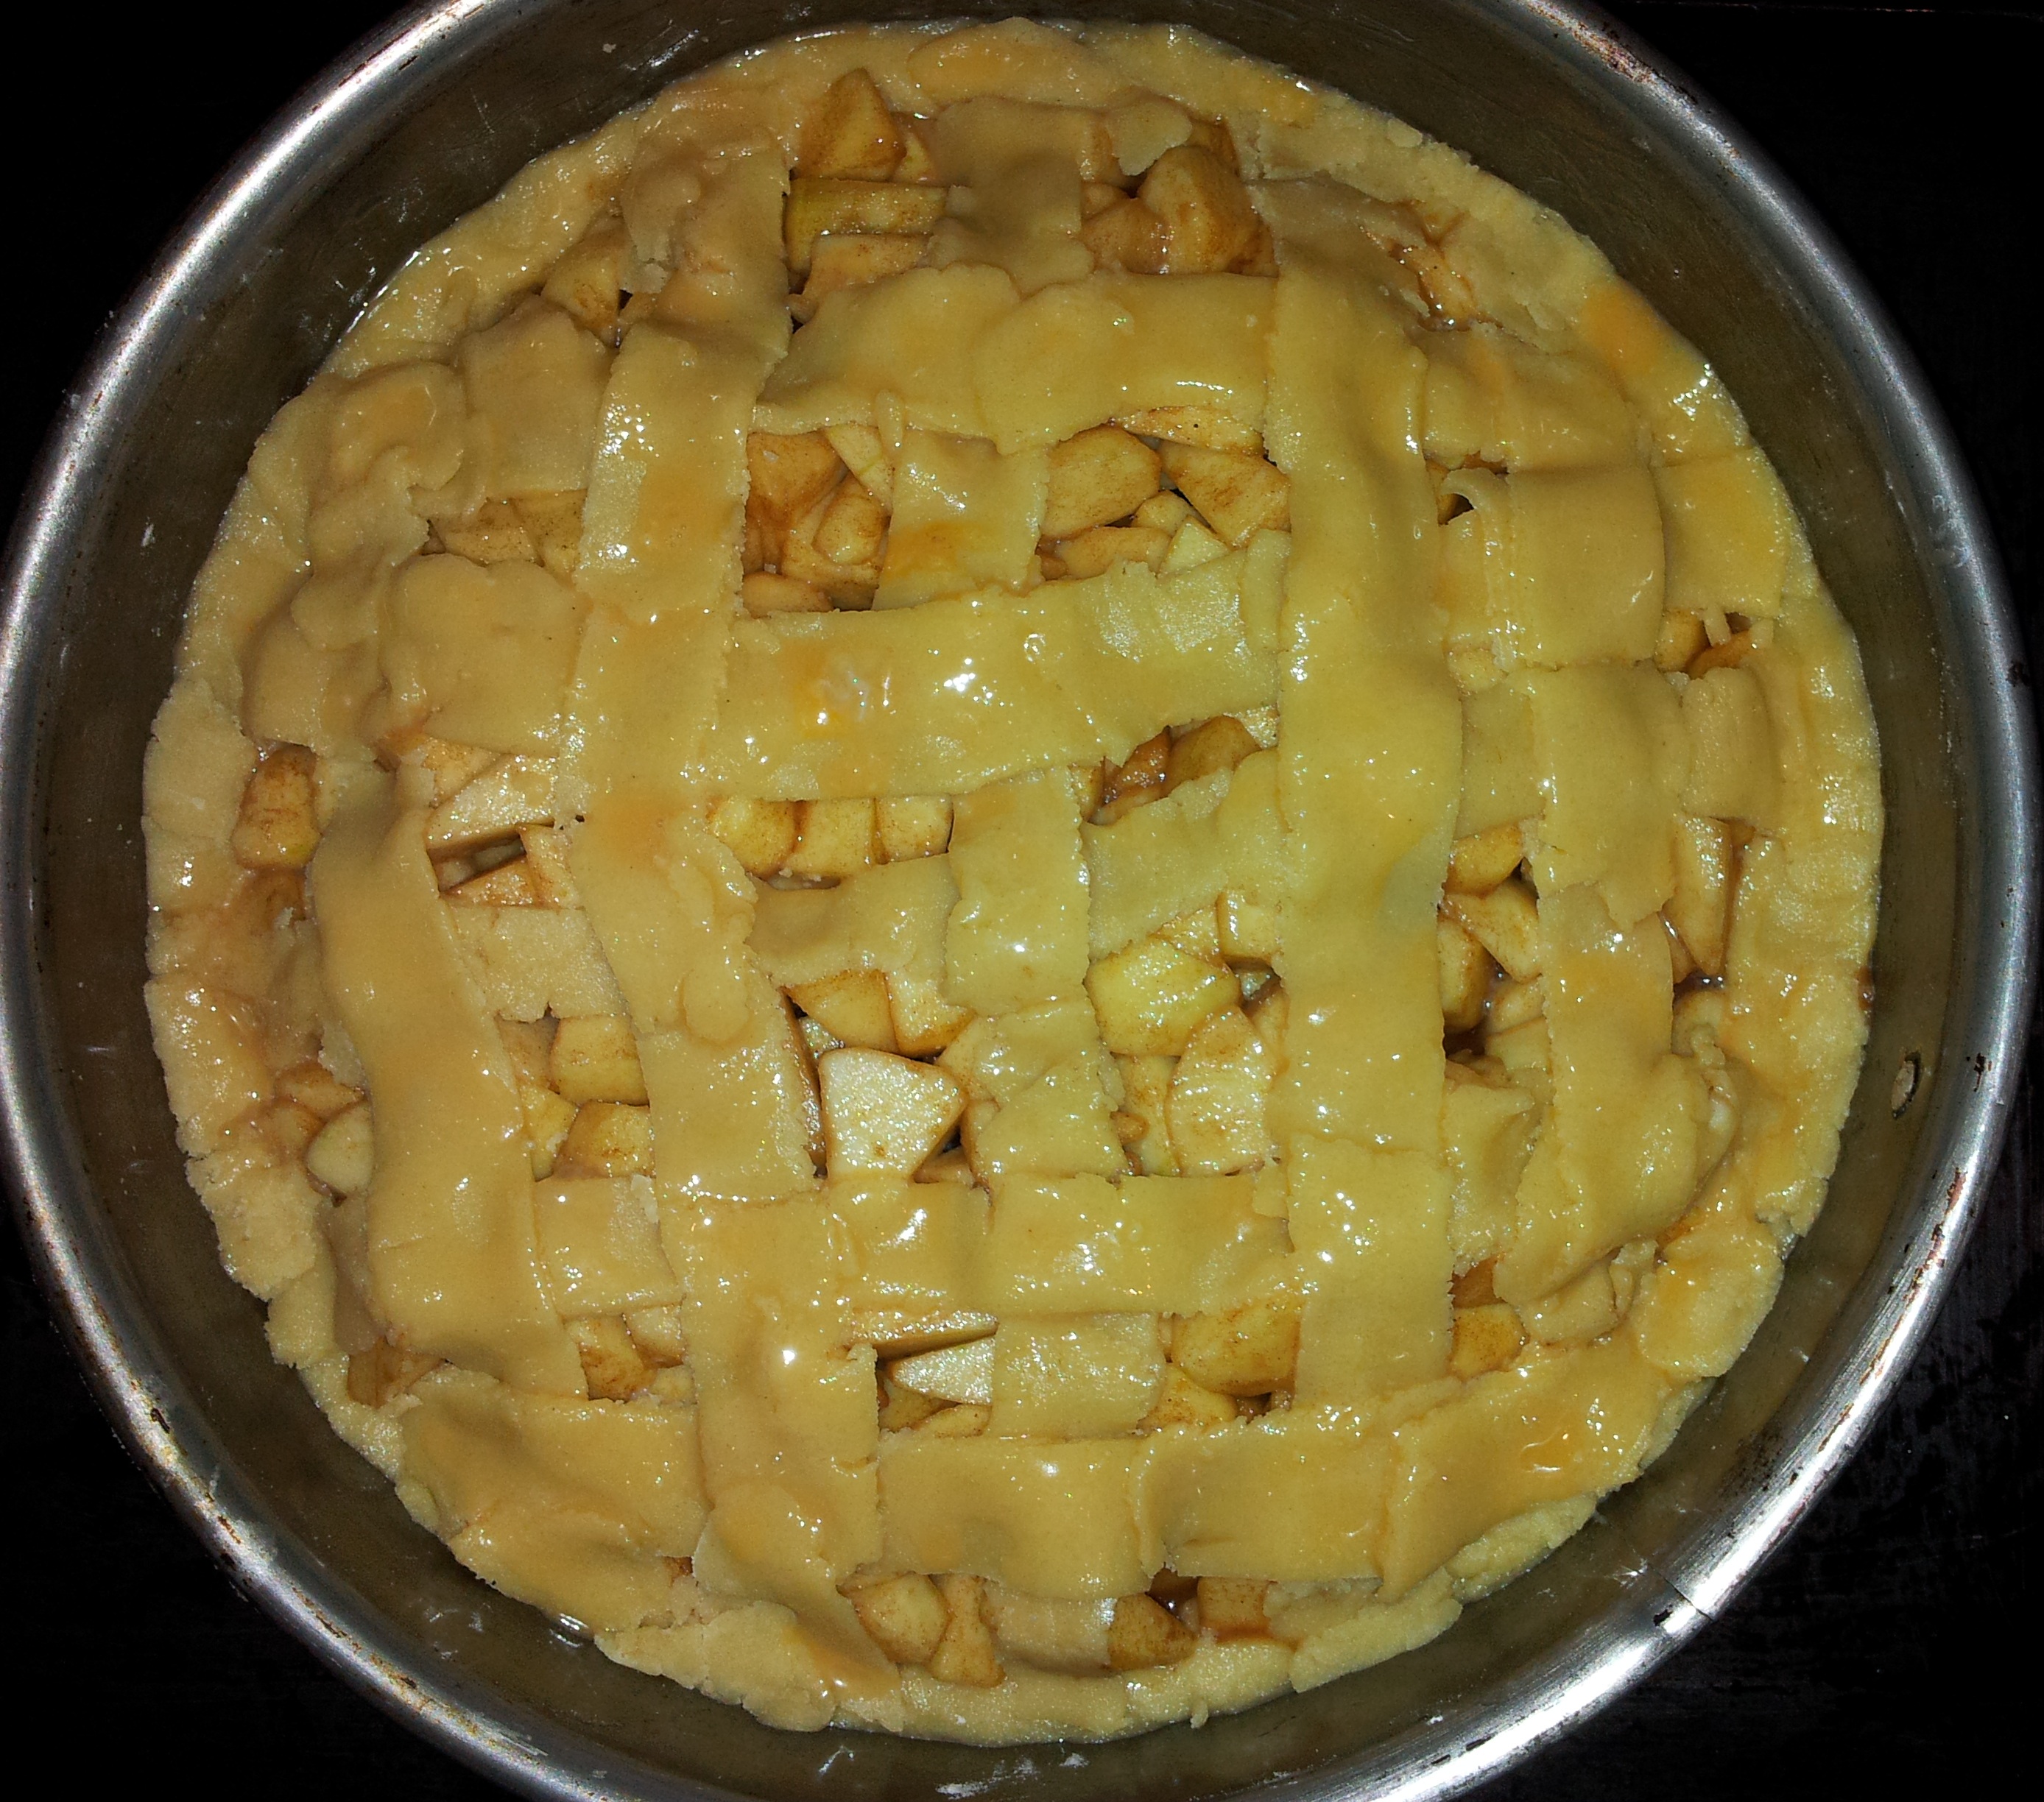 Apple Pie - after baking